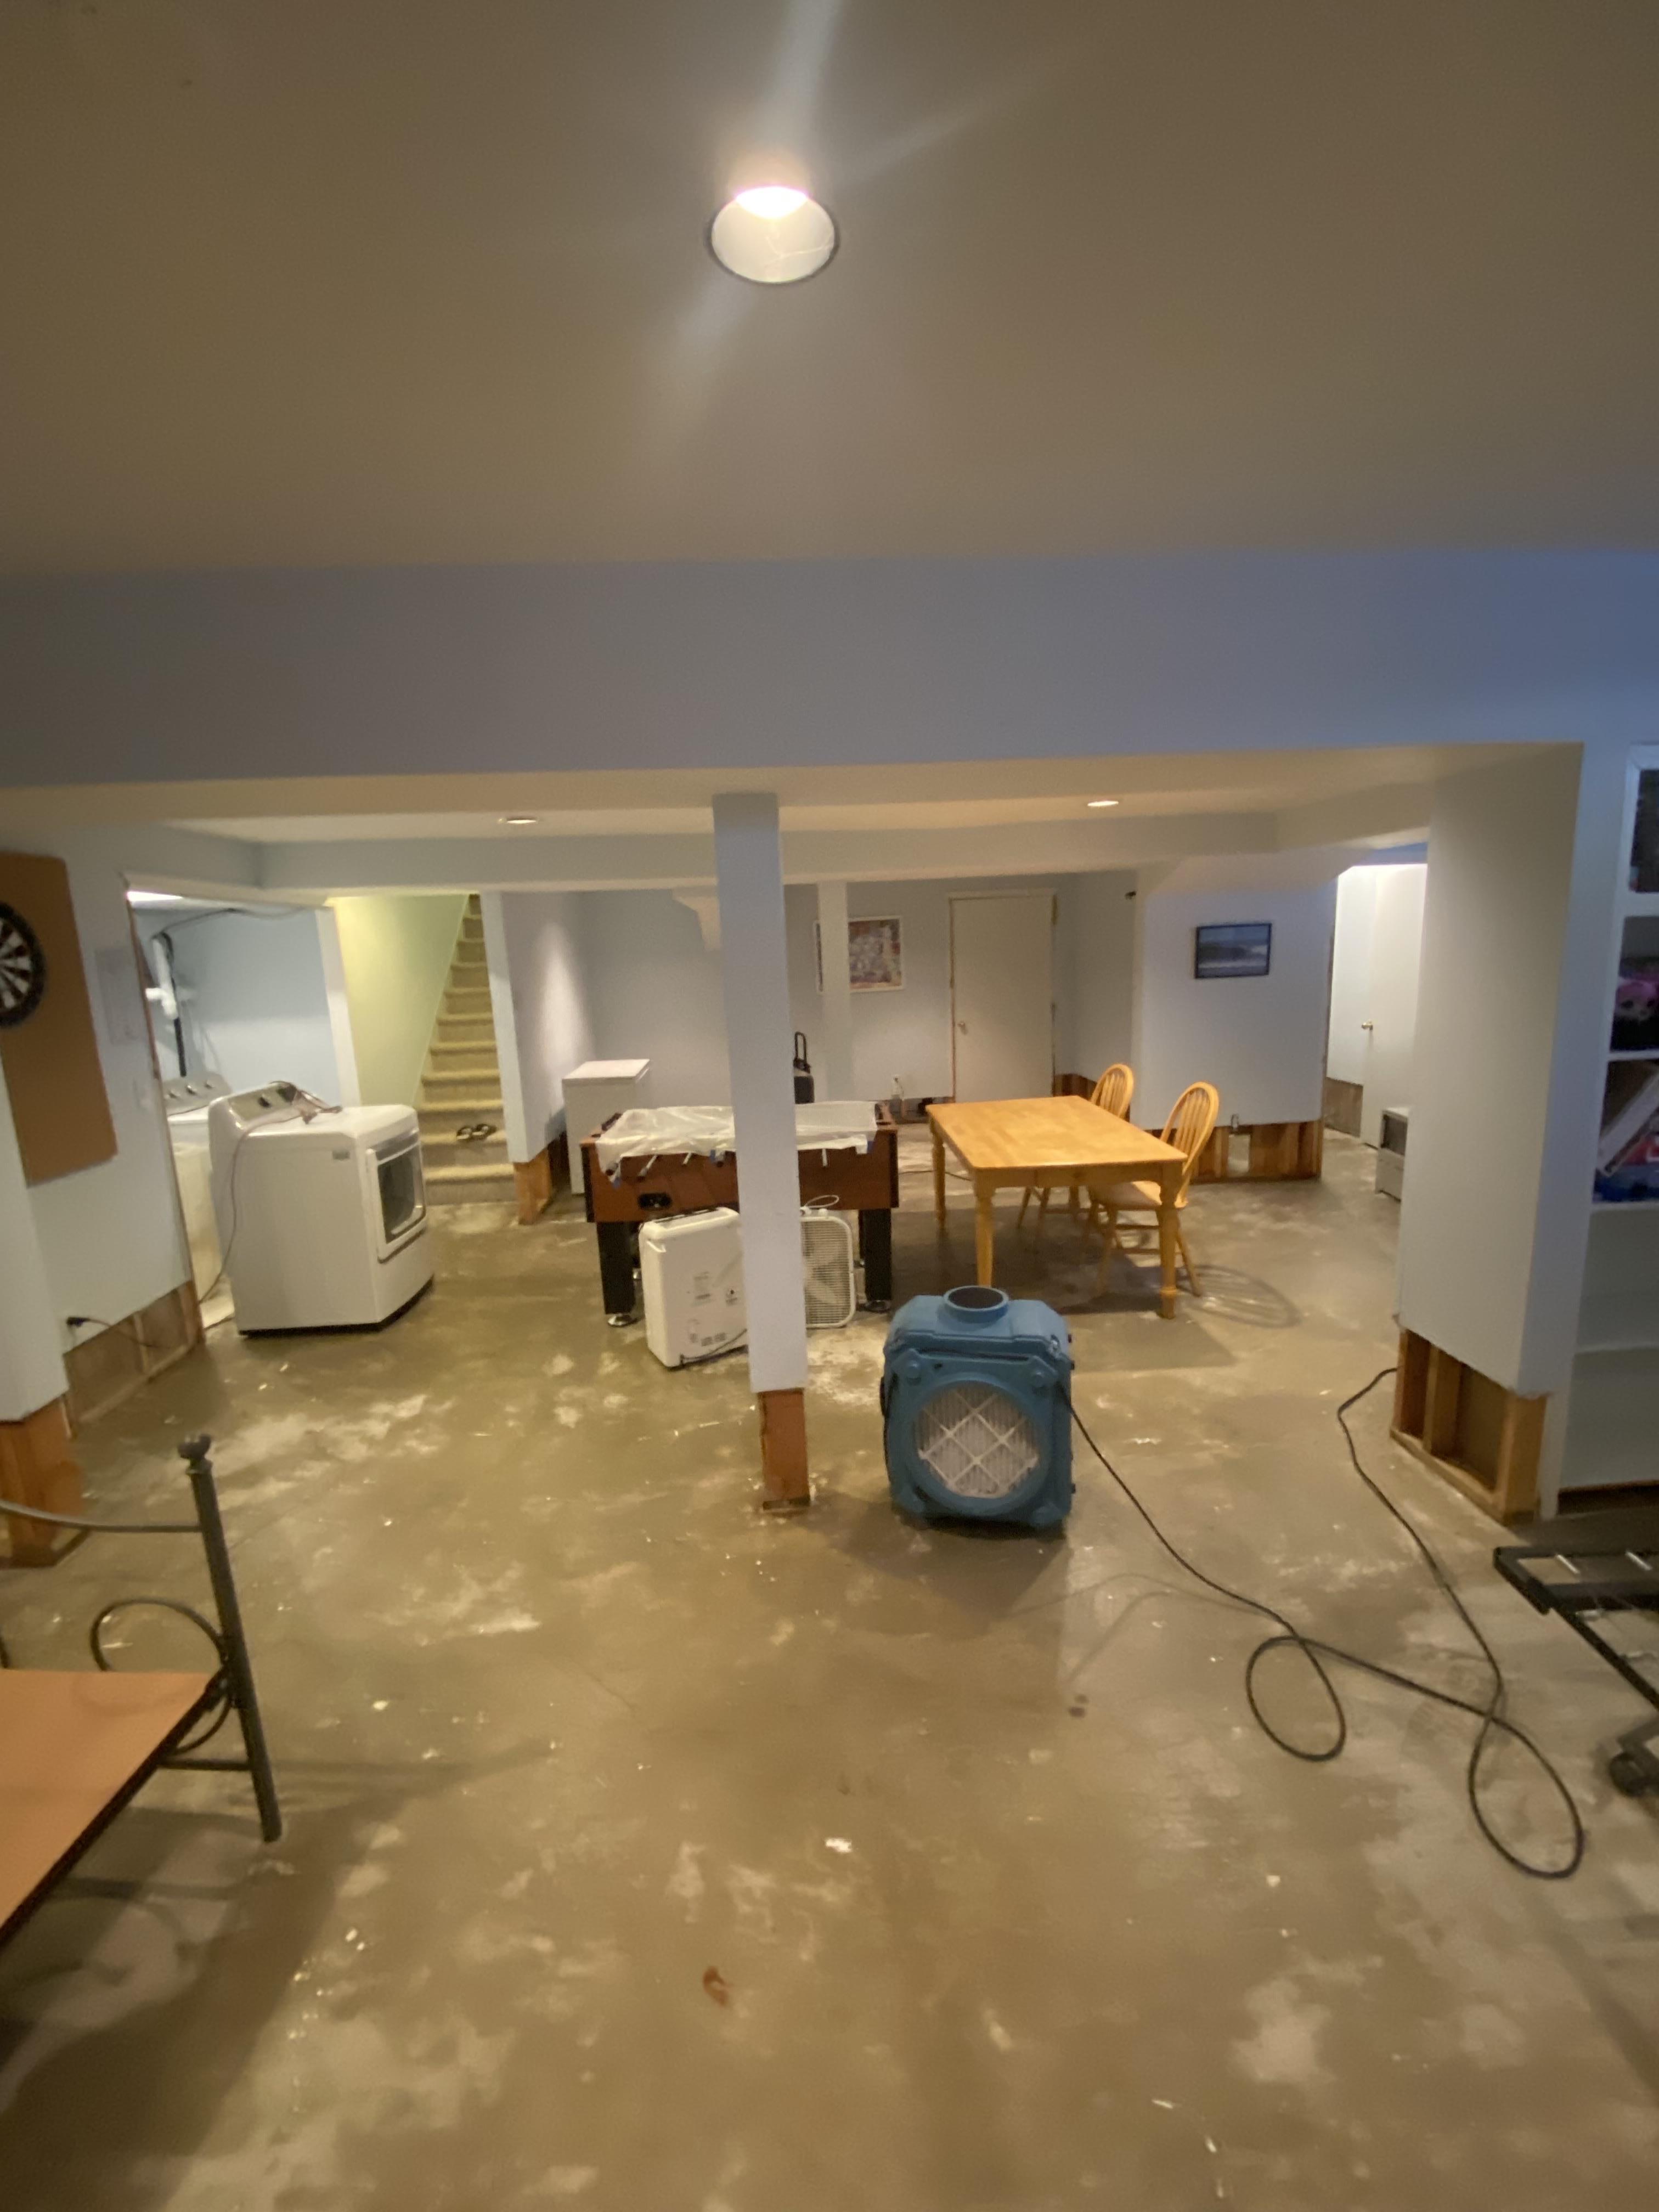 Water damage cleanup in basement